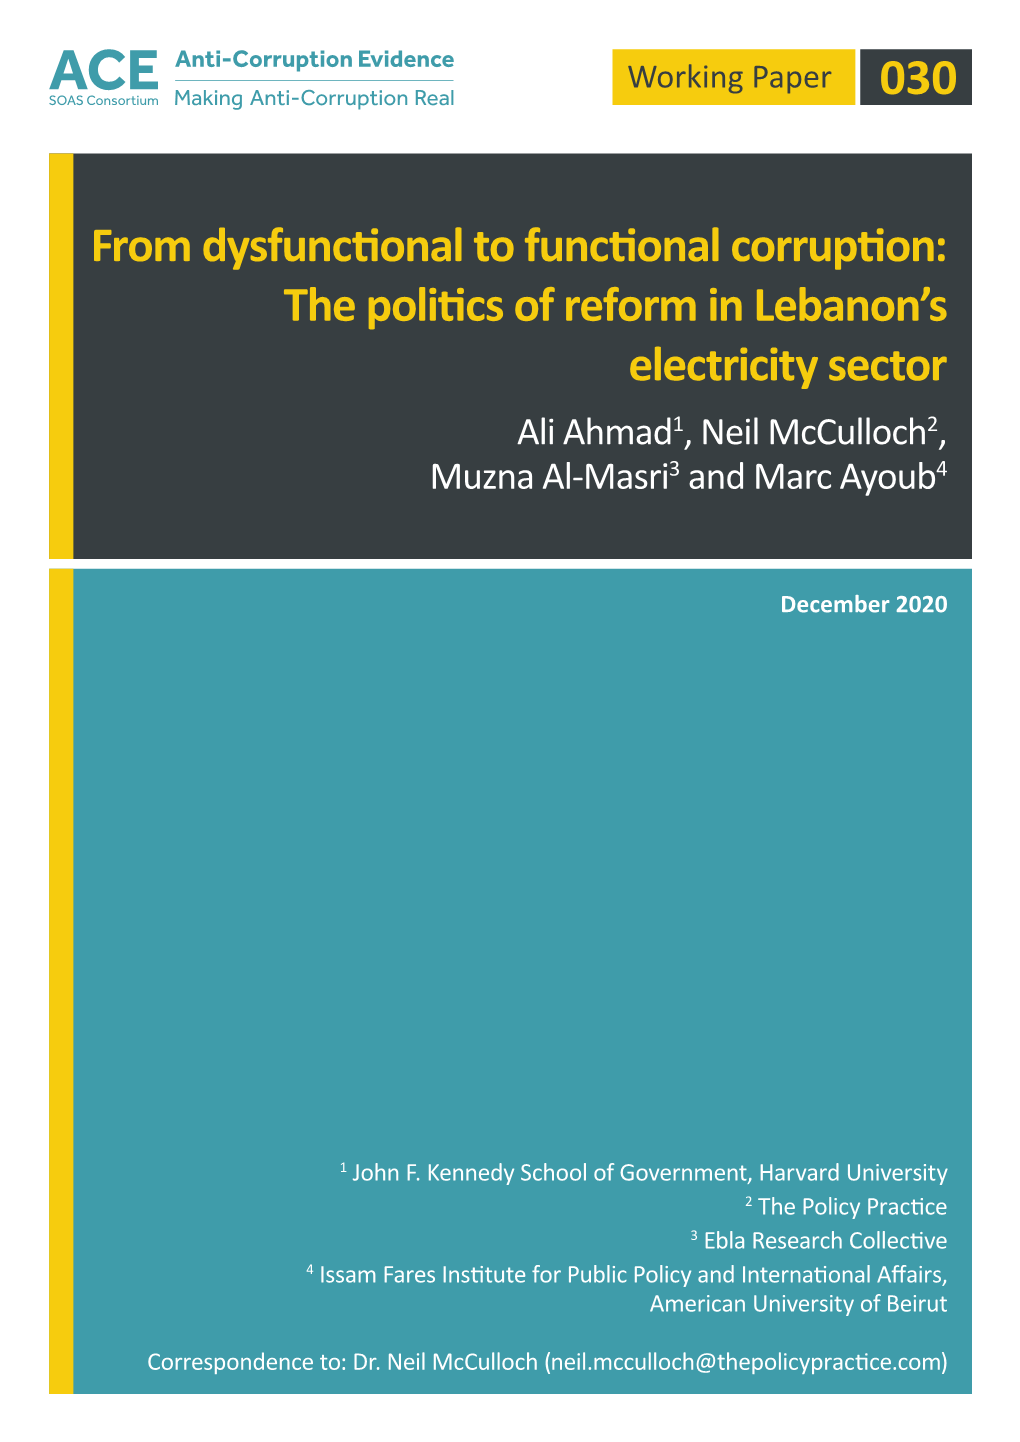 From Dysfunctional to Functional Corruption: the Politics of Reform in Lebanon’S Electricity Sector Ali Ahmad1, Neil Mcculloch2, Muzna Al-Masri3 and Marc Ayoub4